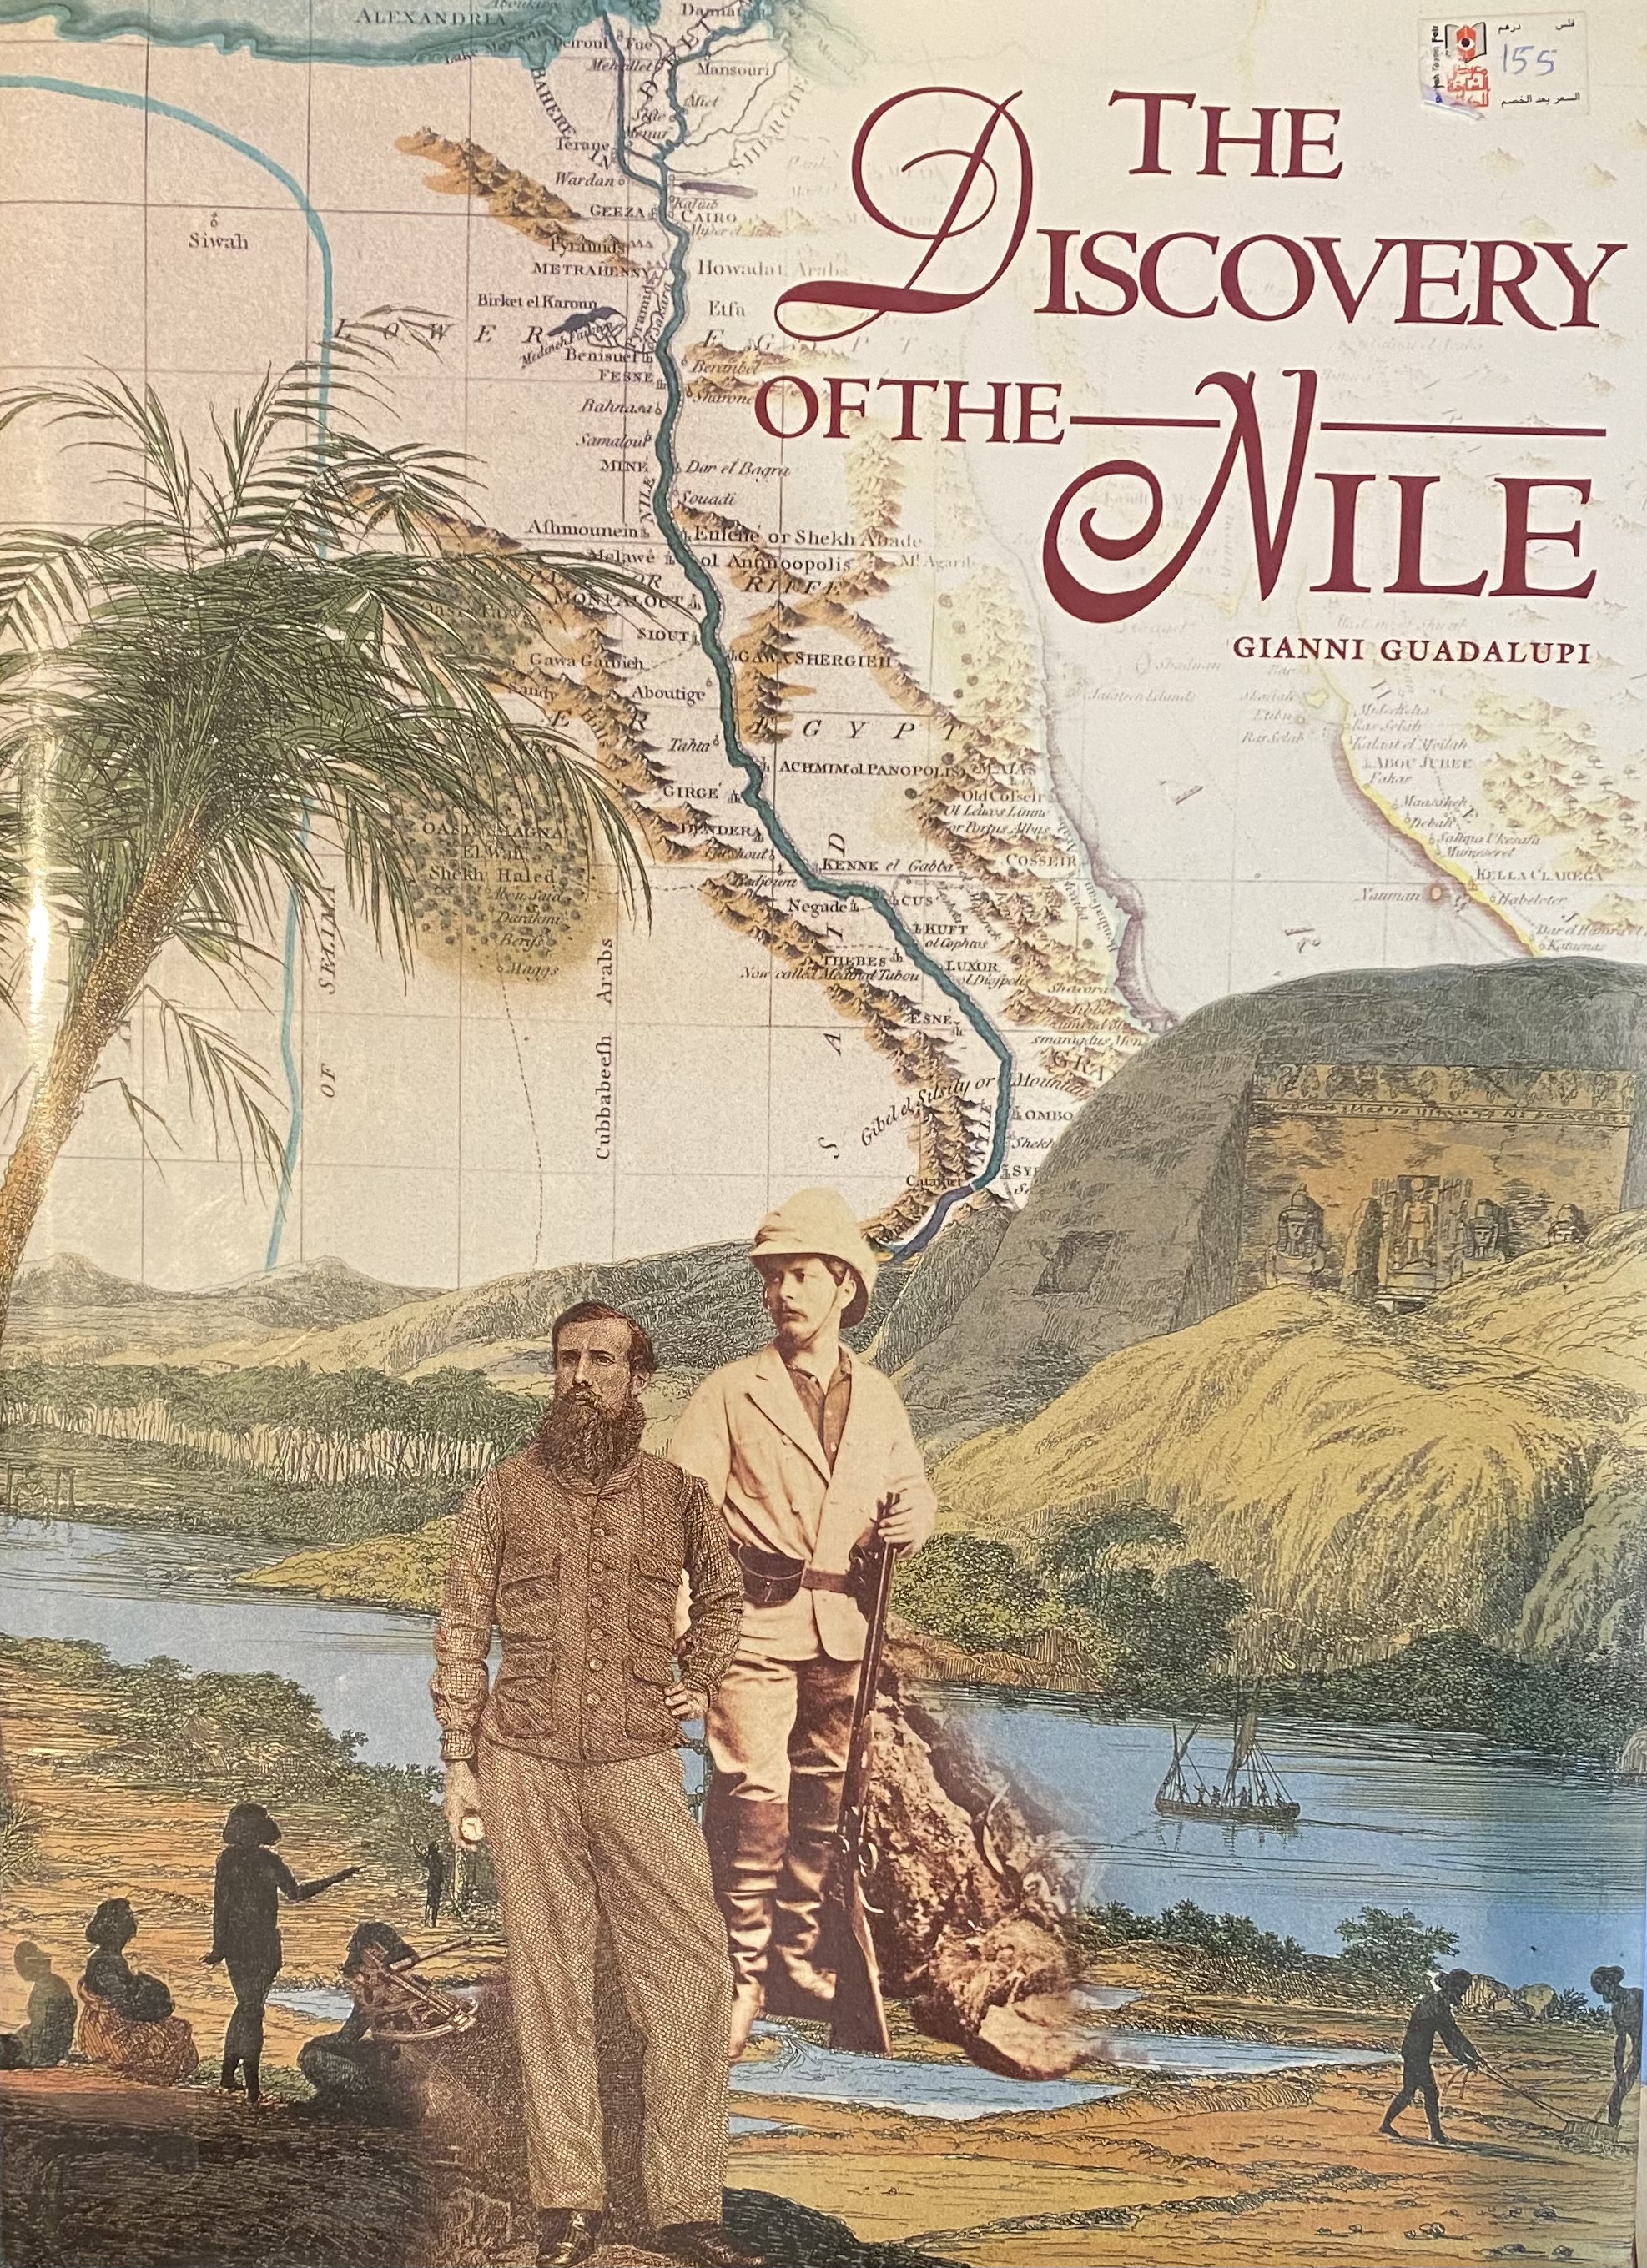 THE DISCOVERY OF THE NILE